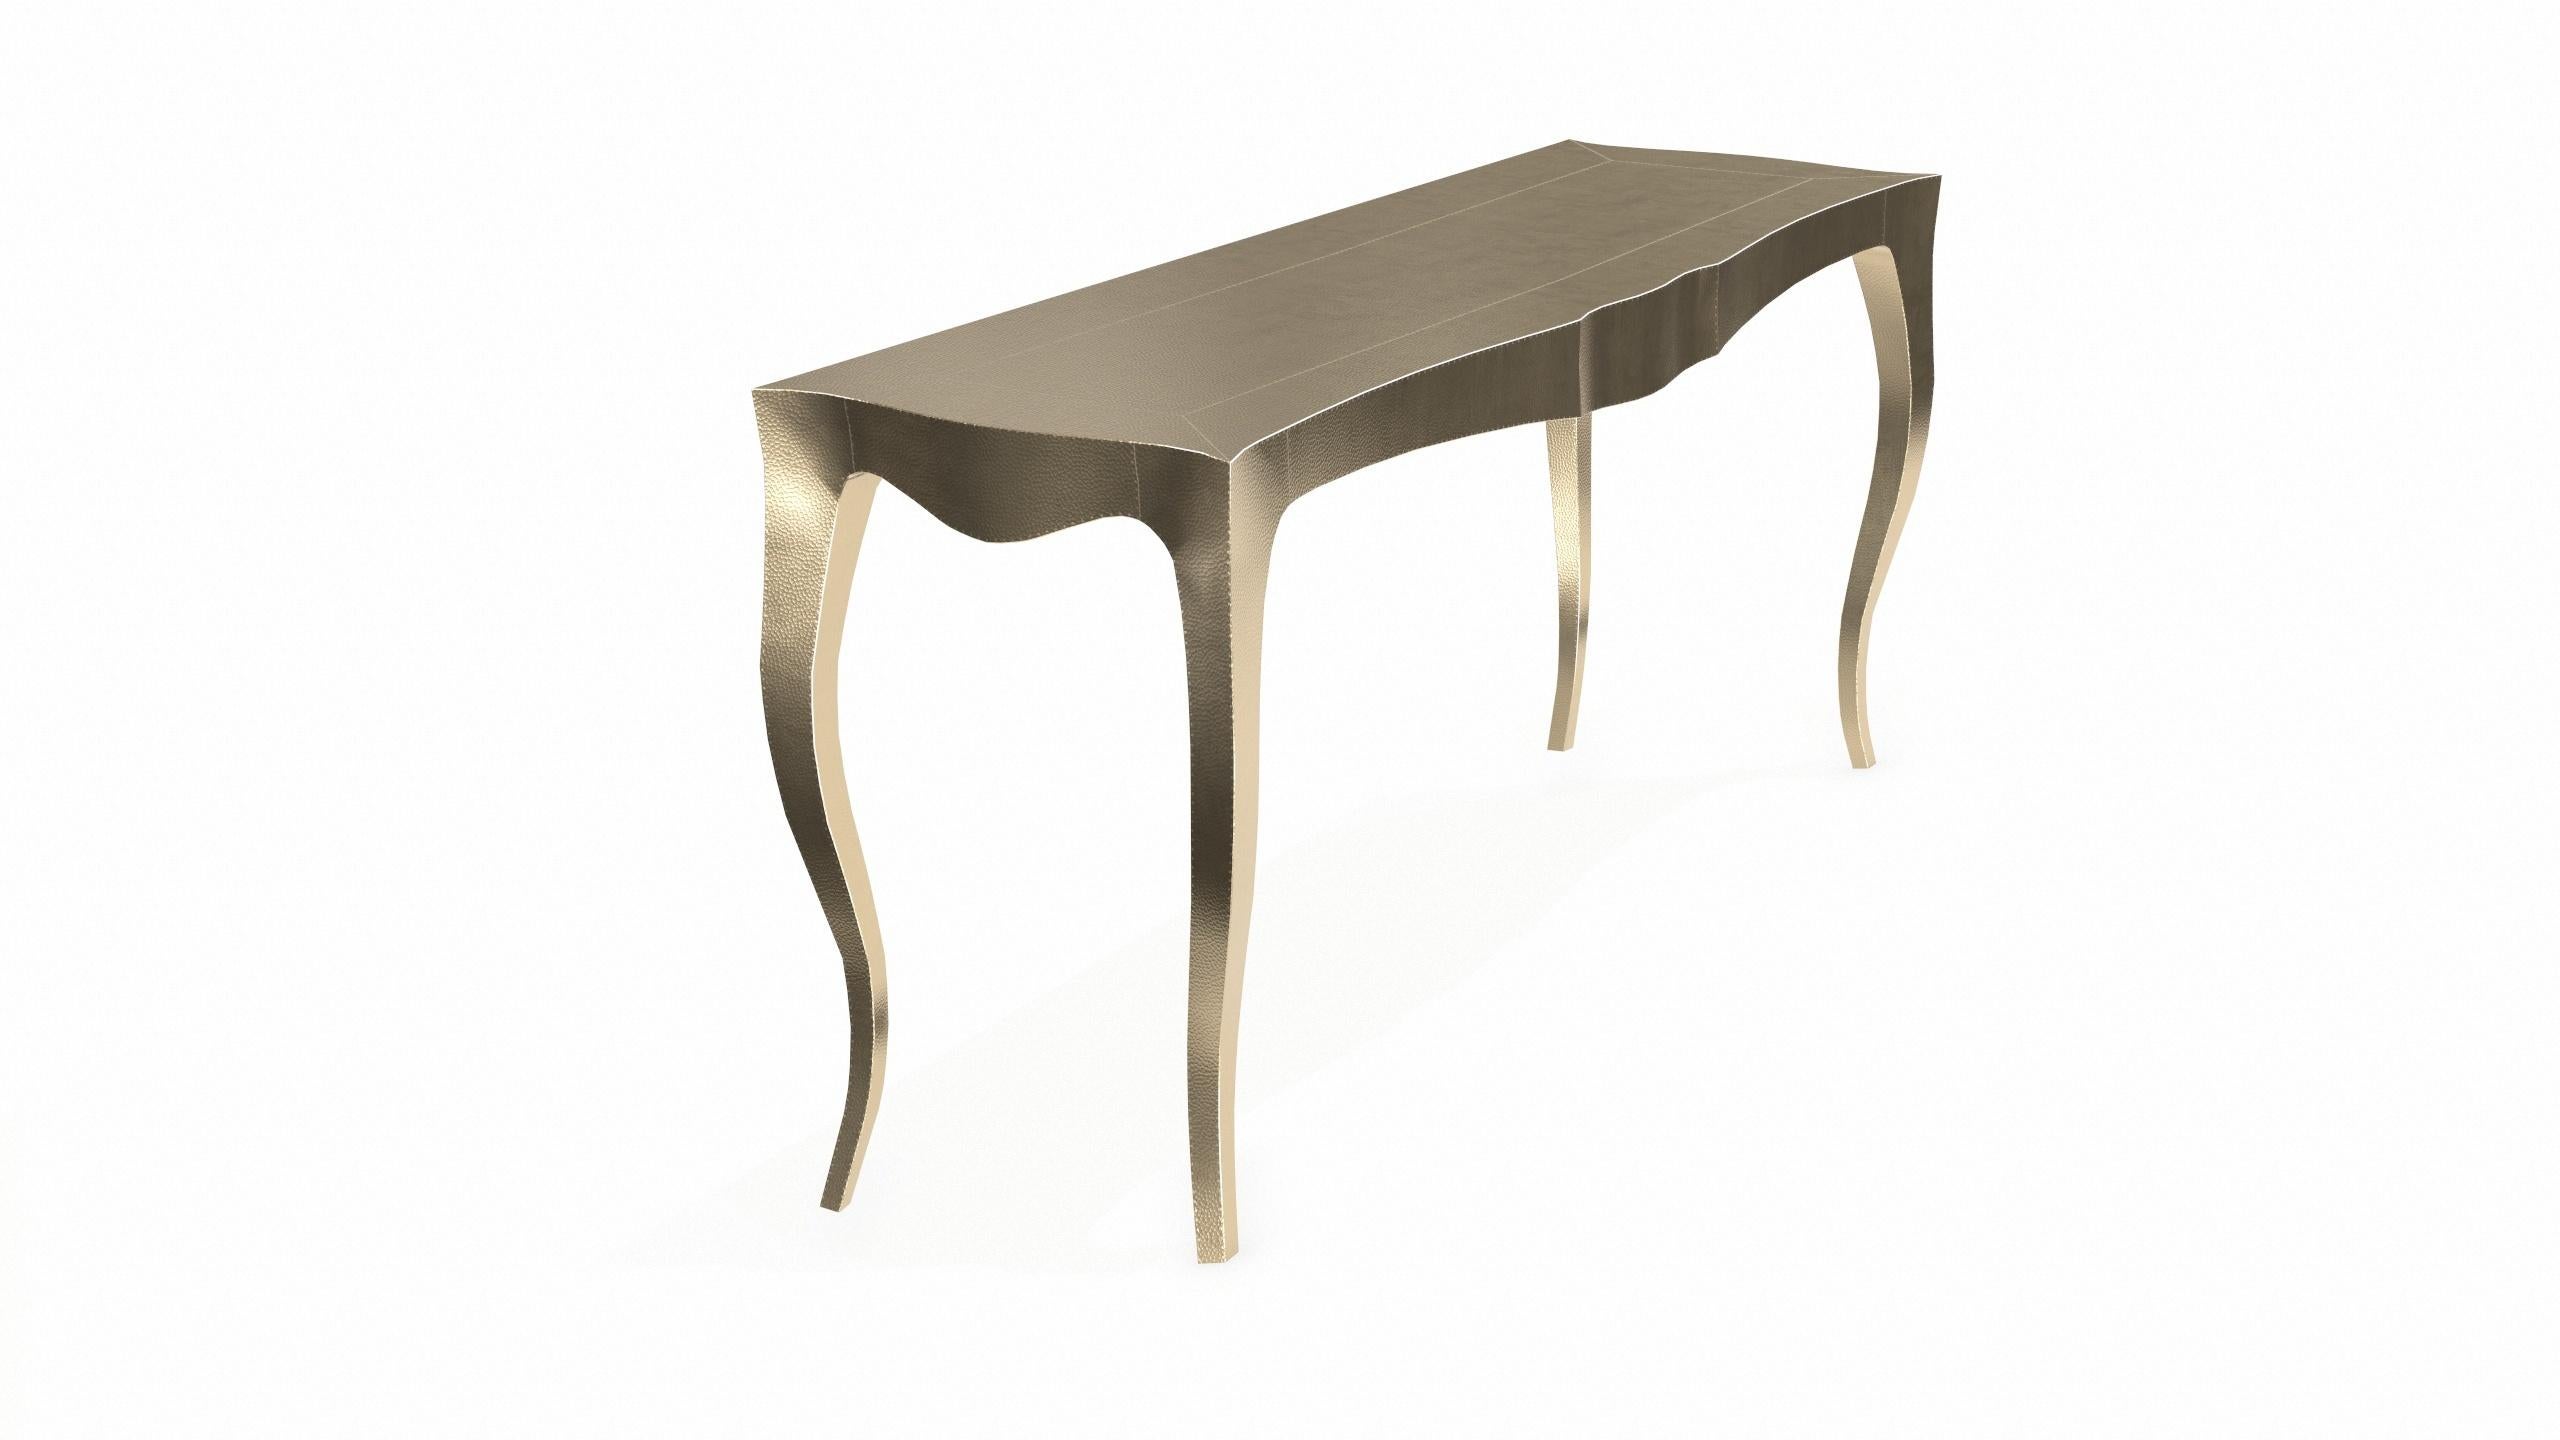 Wood Louise Console Art Deco Conference Tables Mid. Hammered Brass by Paul Mathieu   For Sale